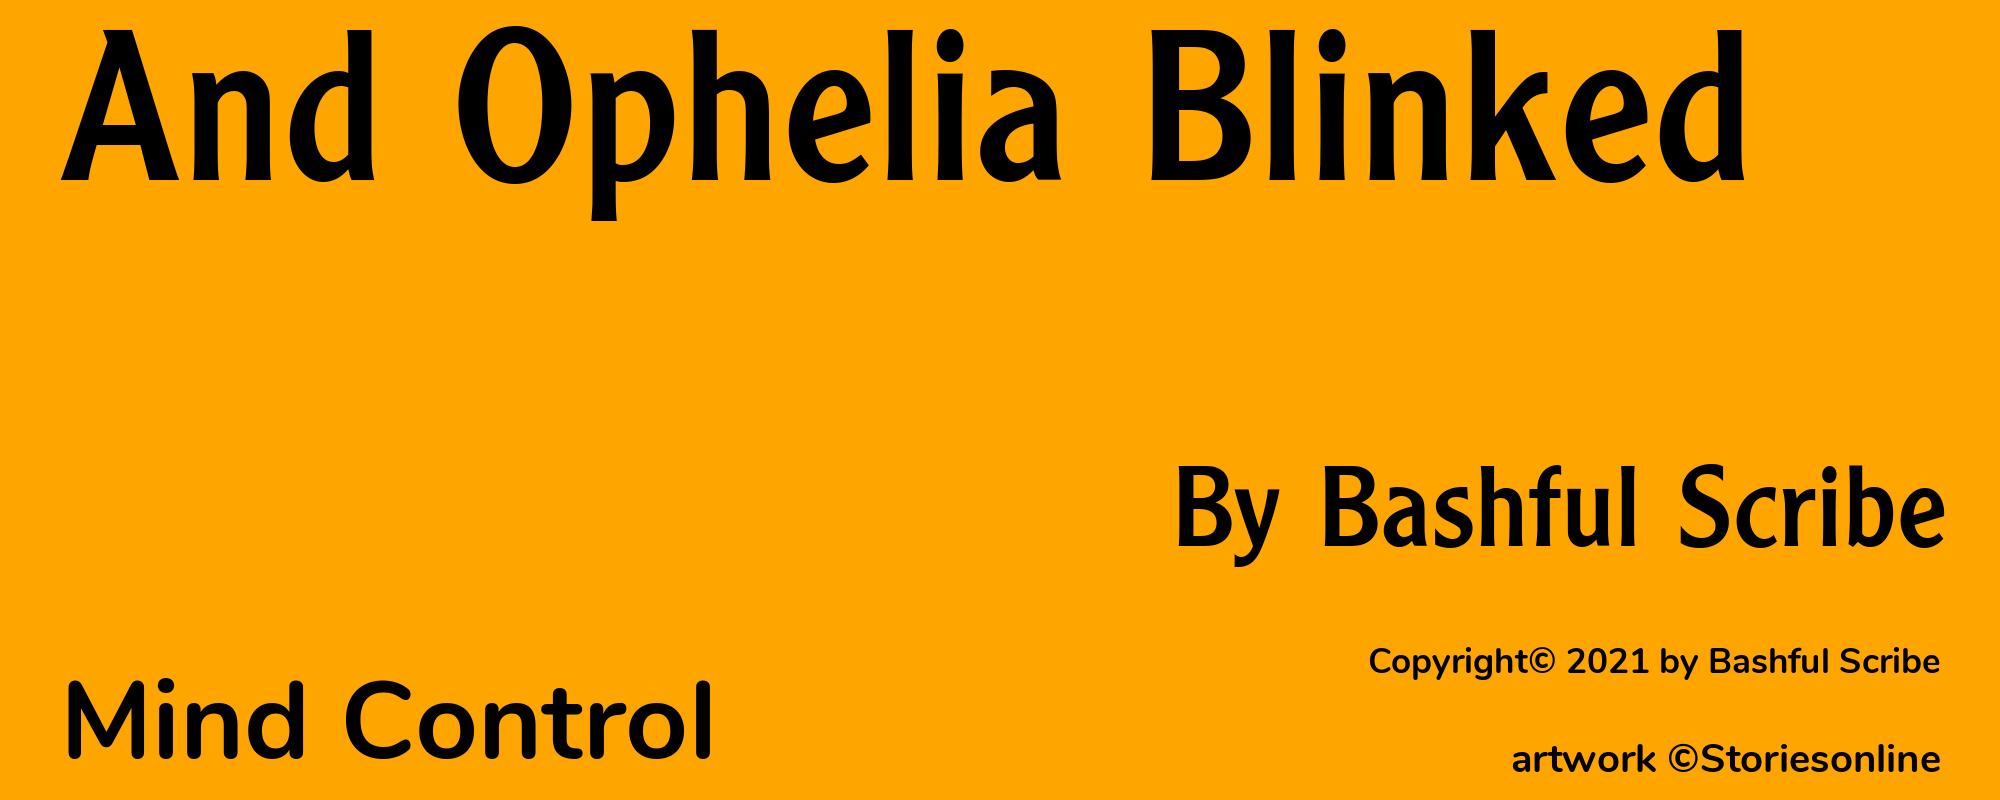 And Ophelia Blinked - Cover